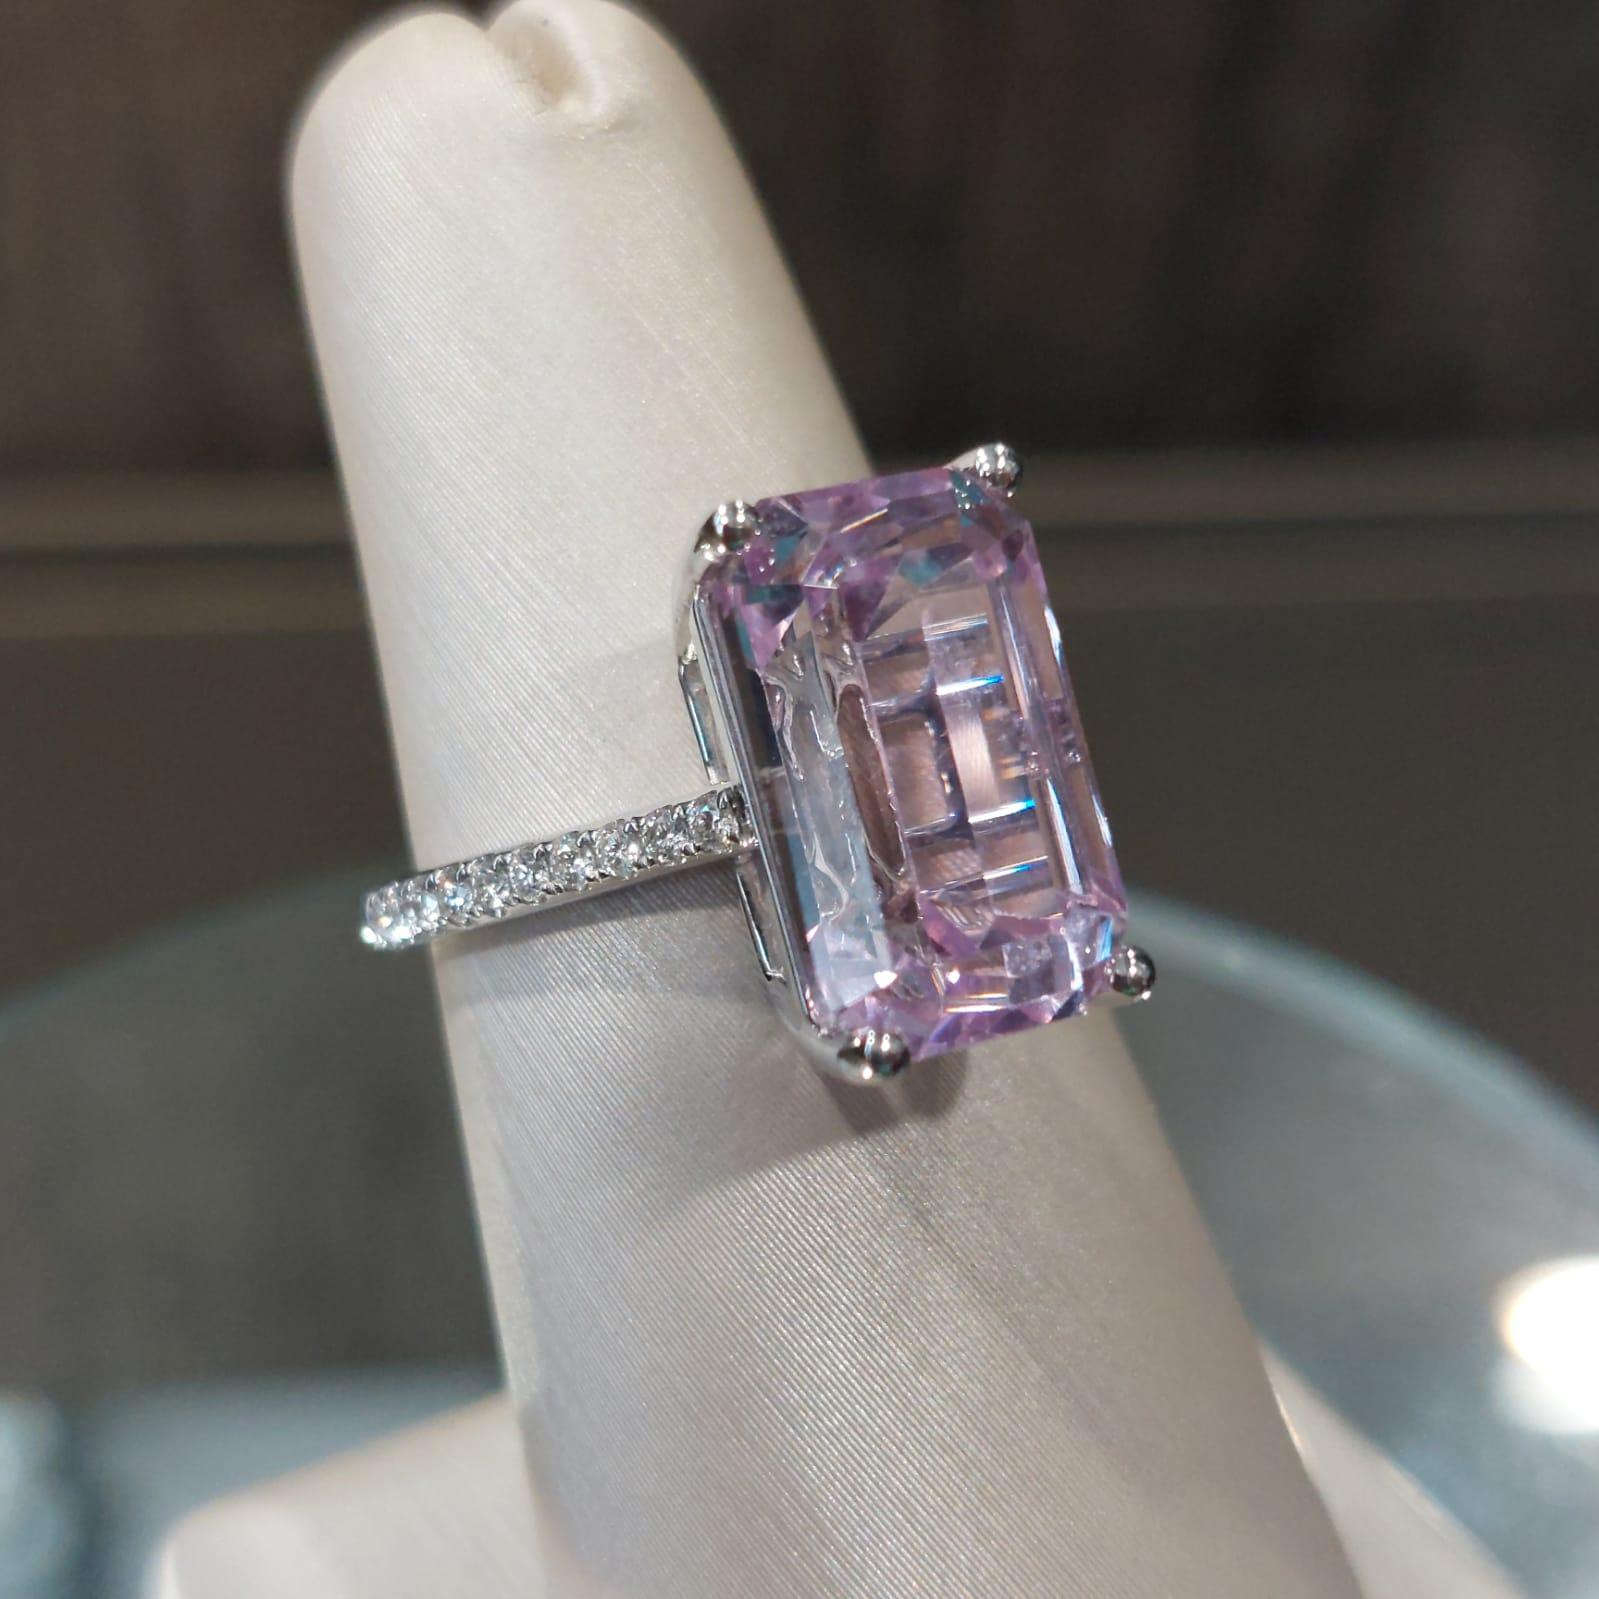 Kunzite is a variety of spodumene, a pyroxene mineral. While spodumene naturally occurs in diverse colors, kunzite is typical of the pink to purple variety.

The Centre Kunzite weighs 8.49 Carat, with 20 pieces 0.18 Carat of diamonds beautifully set